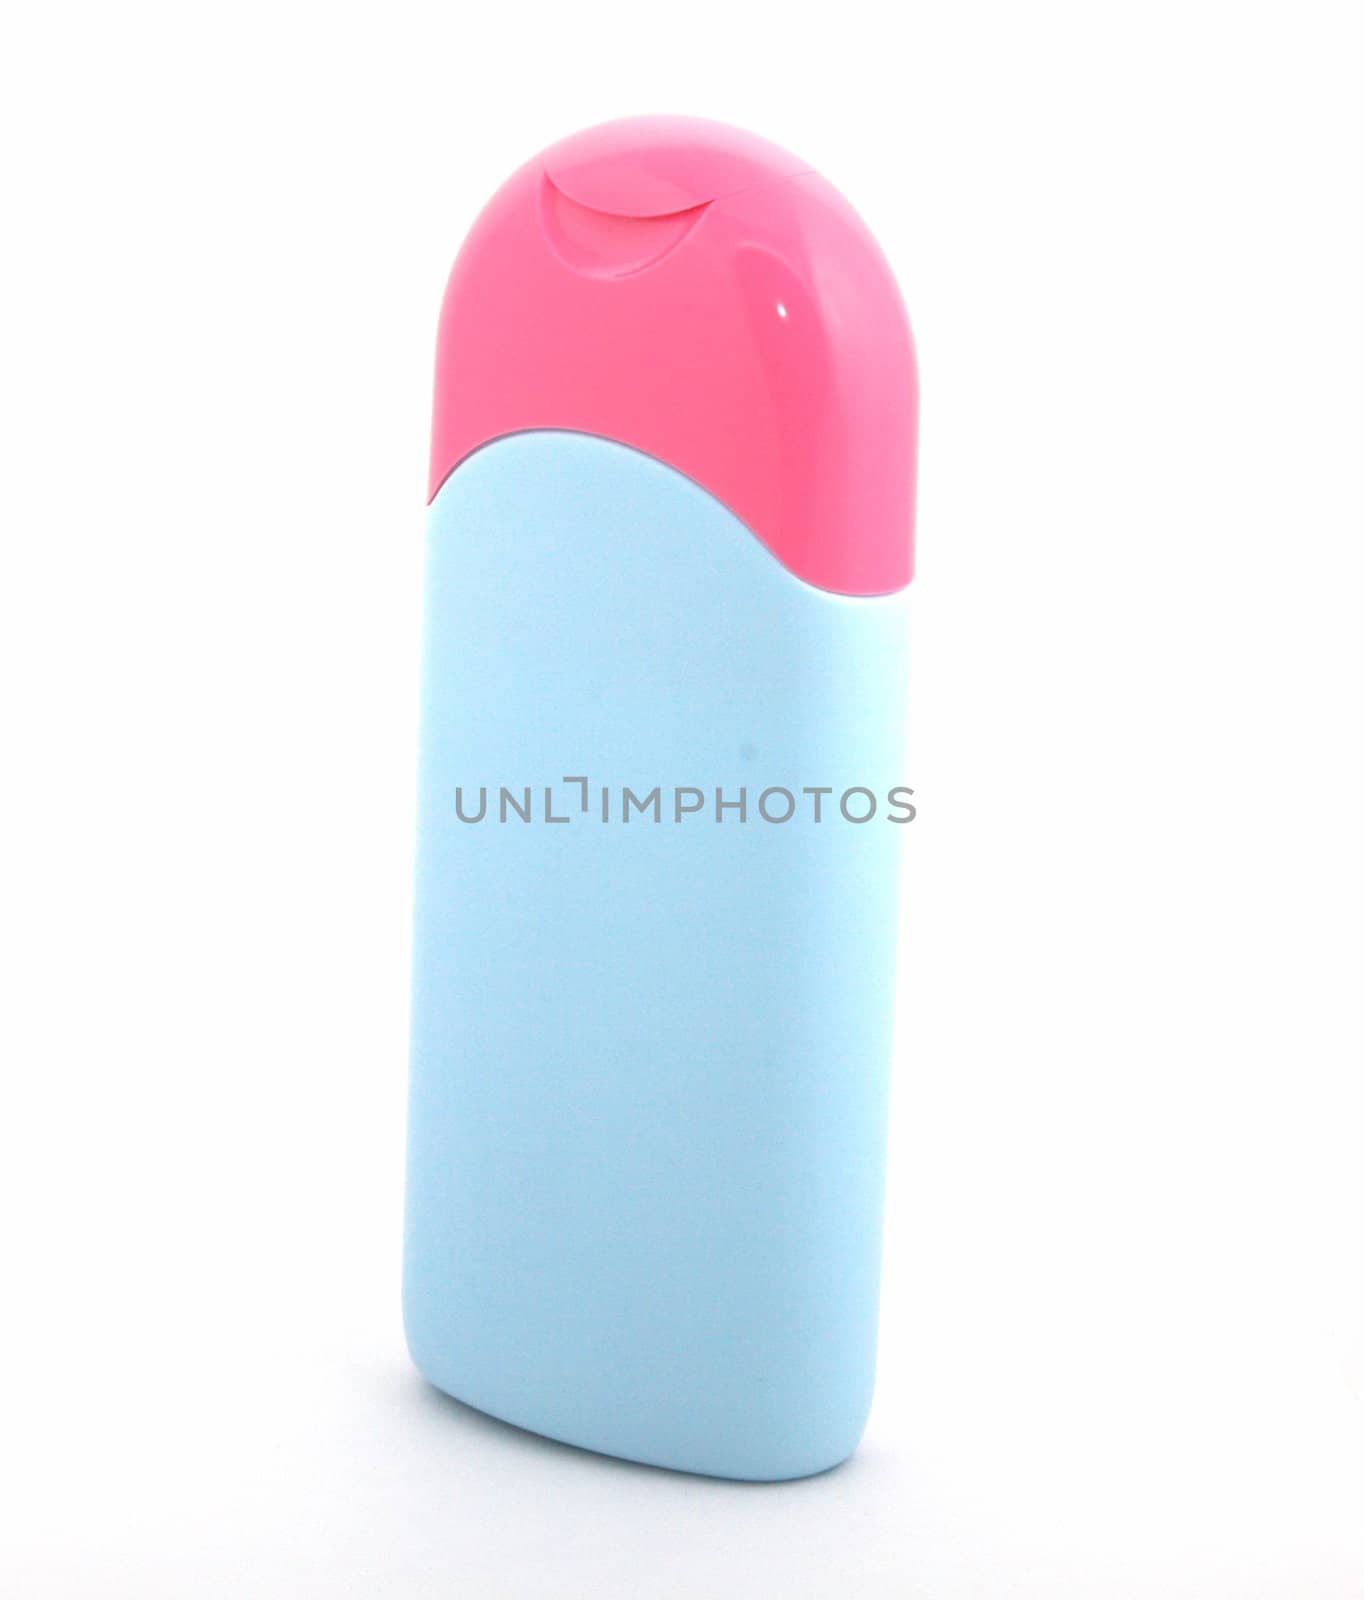 Bottle of blue color with pink a cover on a white background